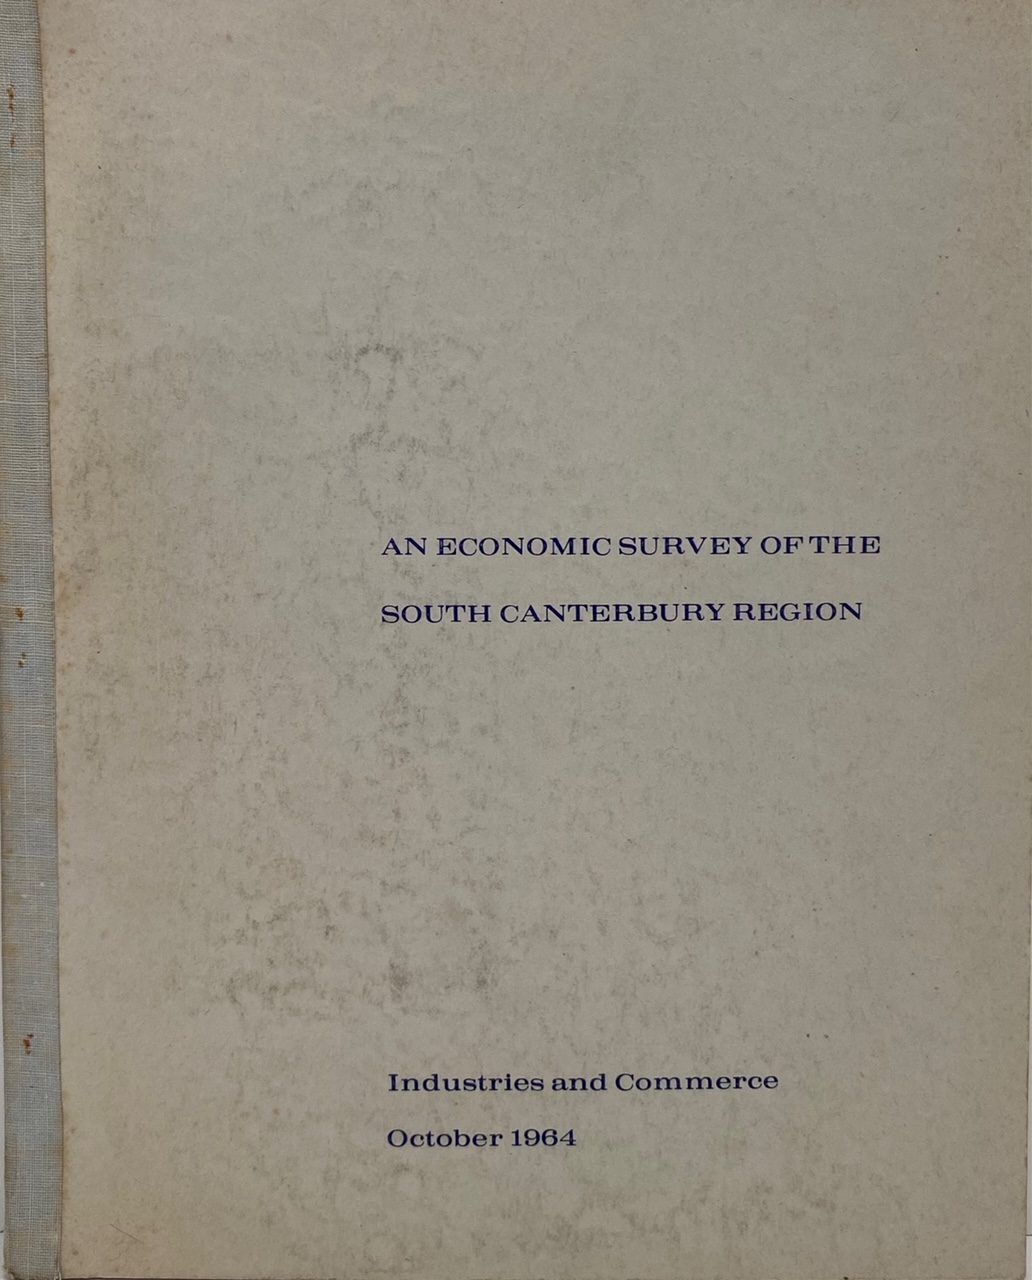 AN ECONOMIC SURVEY OF THE SOUTH CANTERBURY REGION: Industries and Commerce 1964